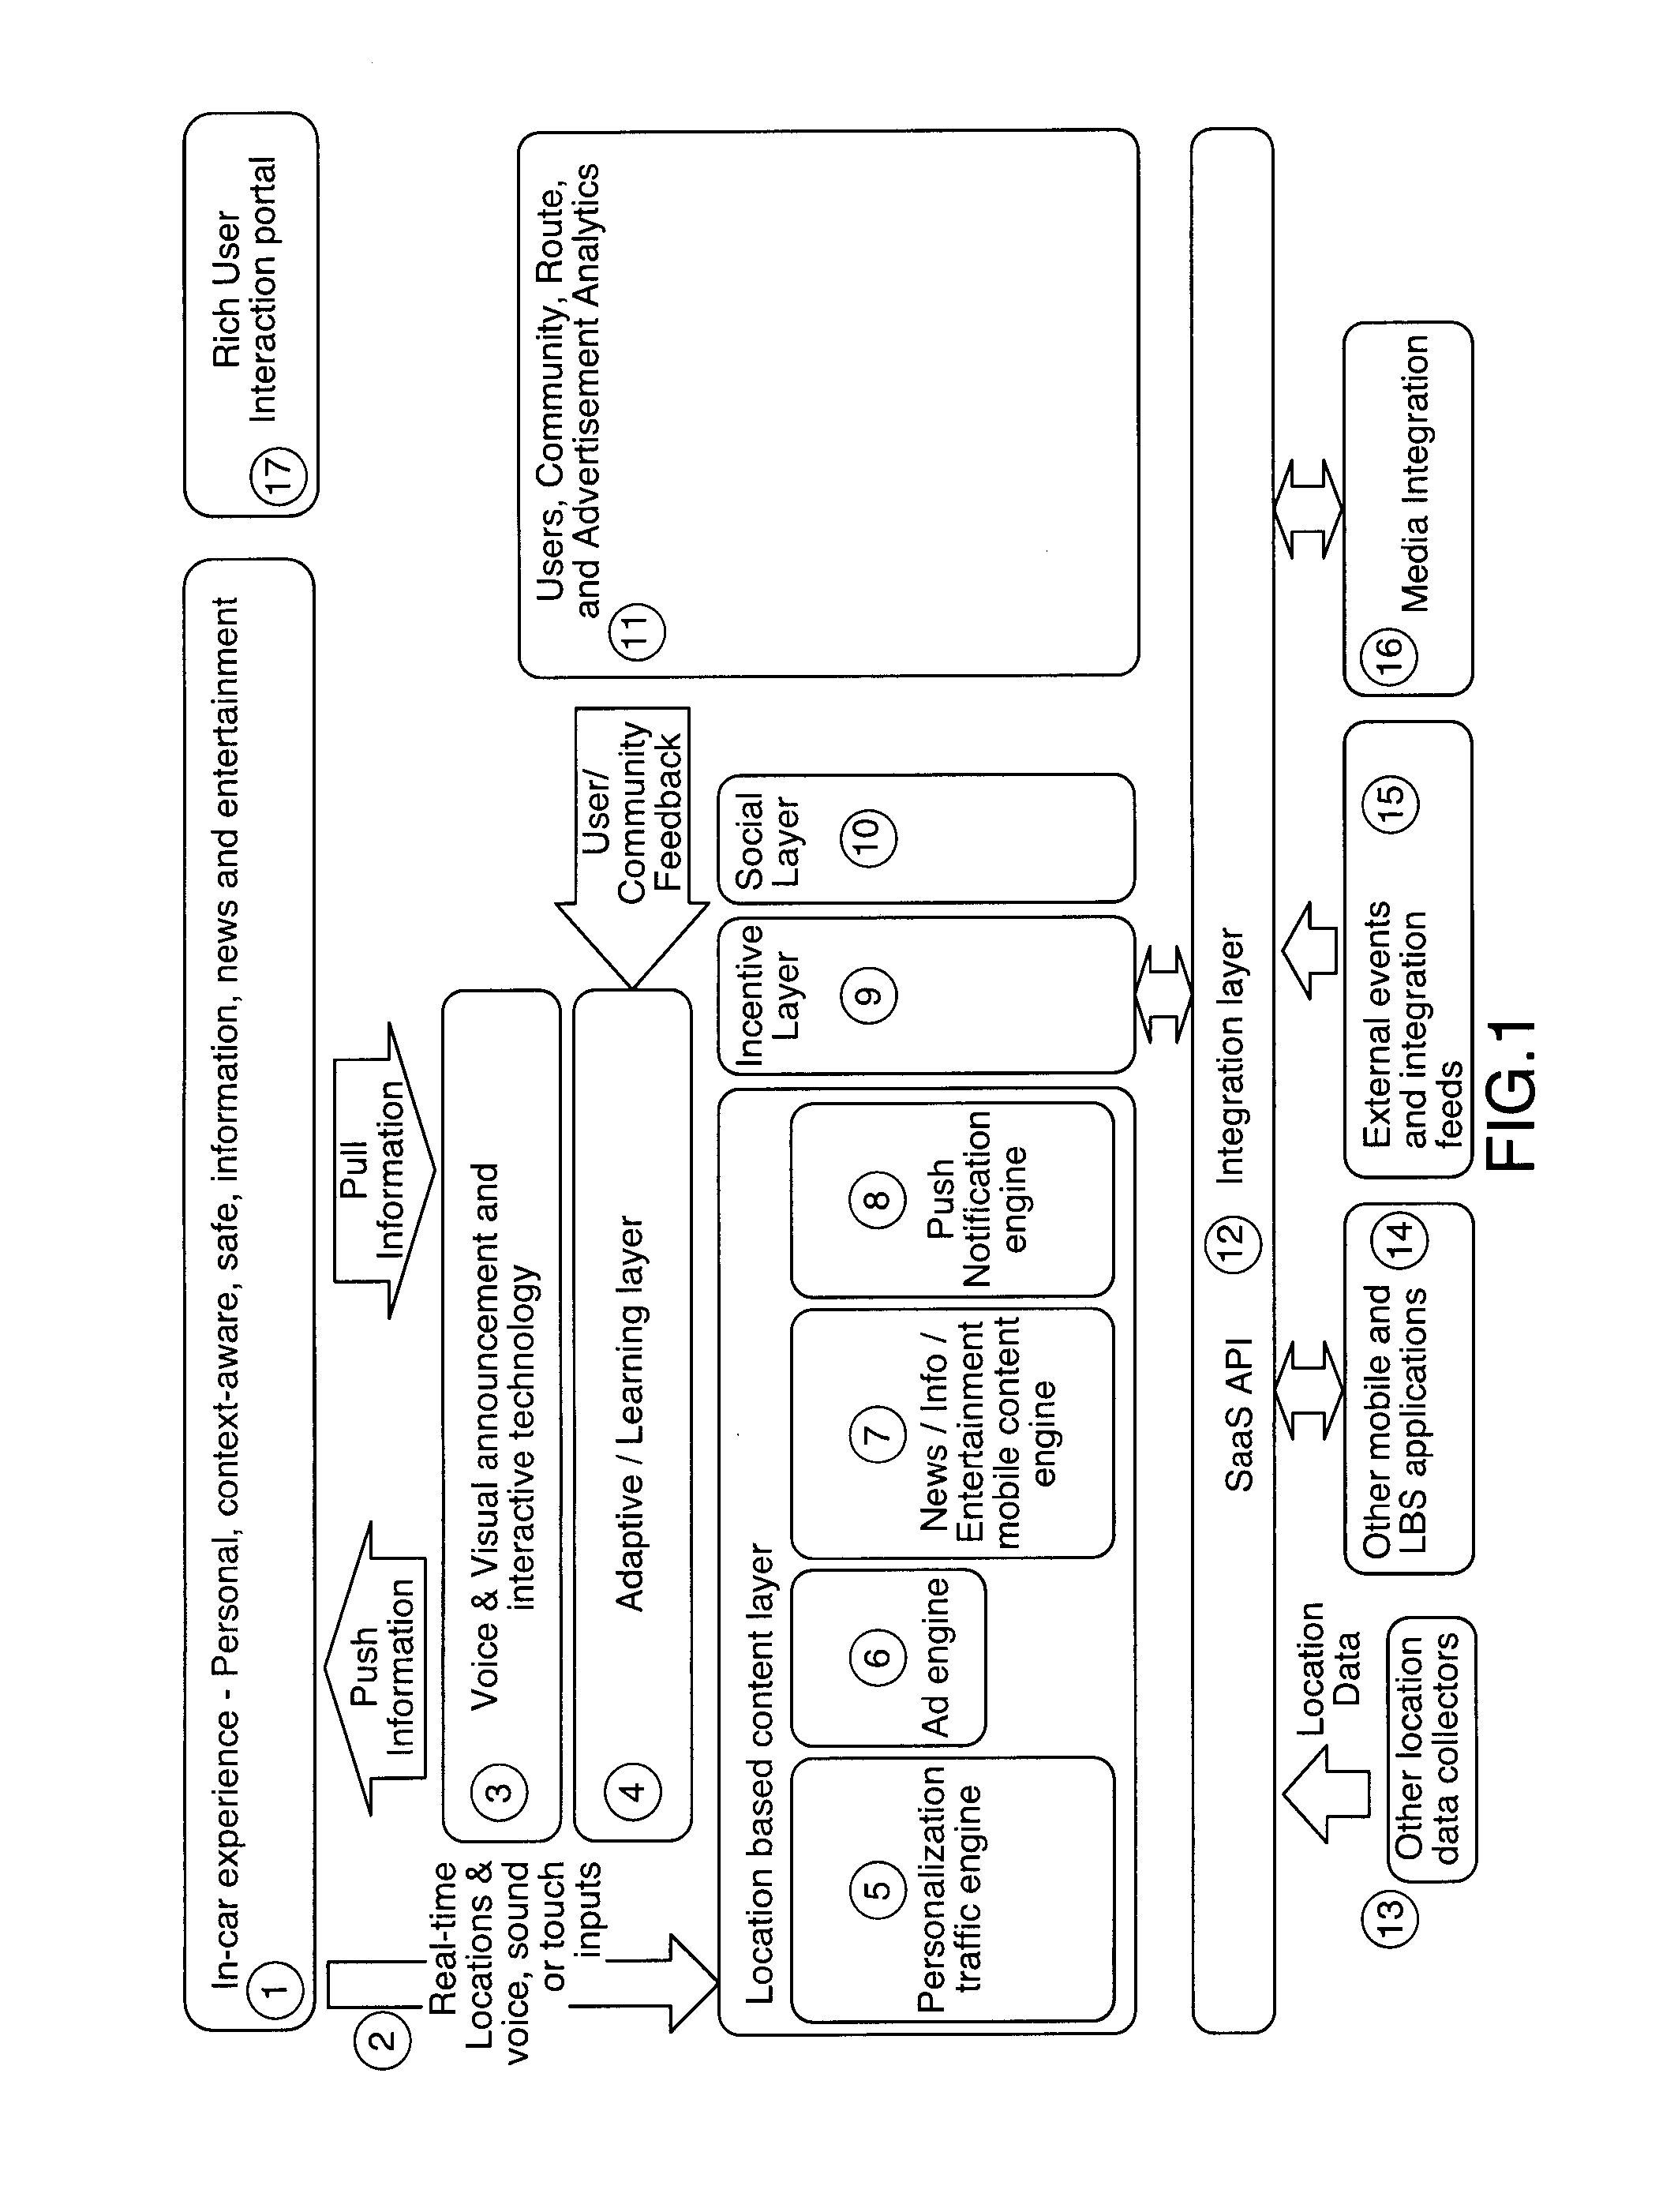 Systems and methods for delivering high relevant travel related content to mobile devices